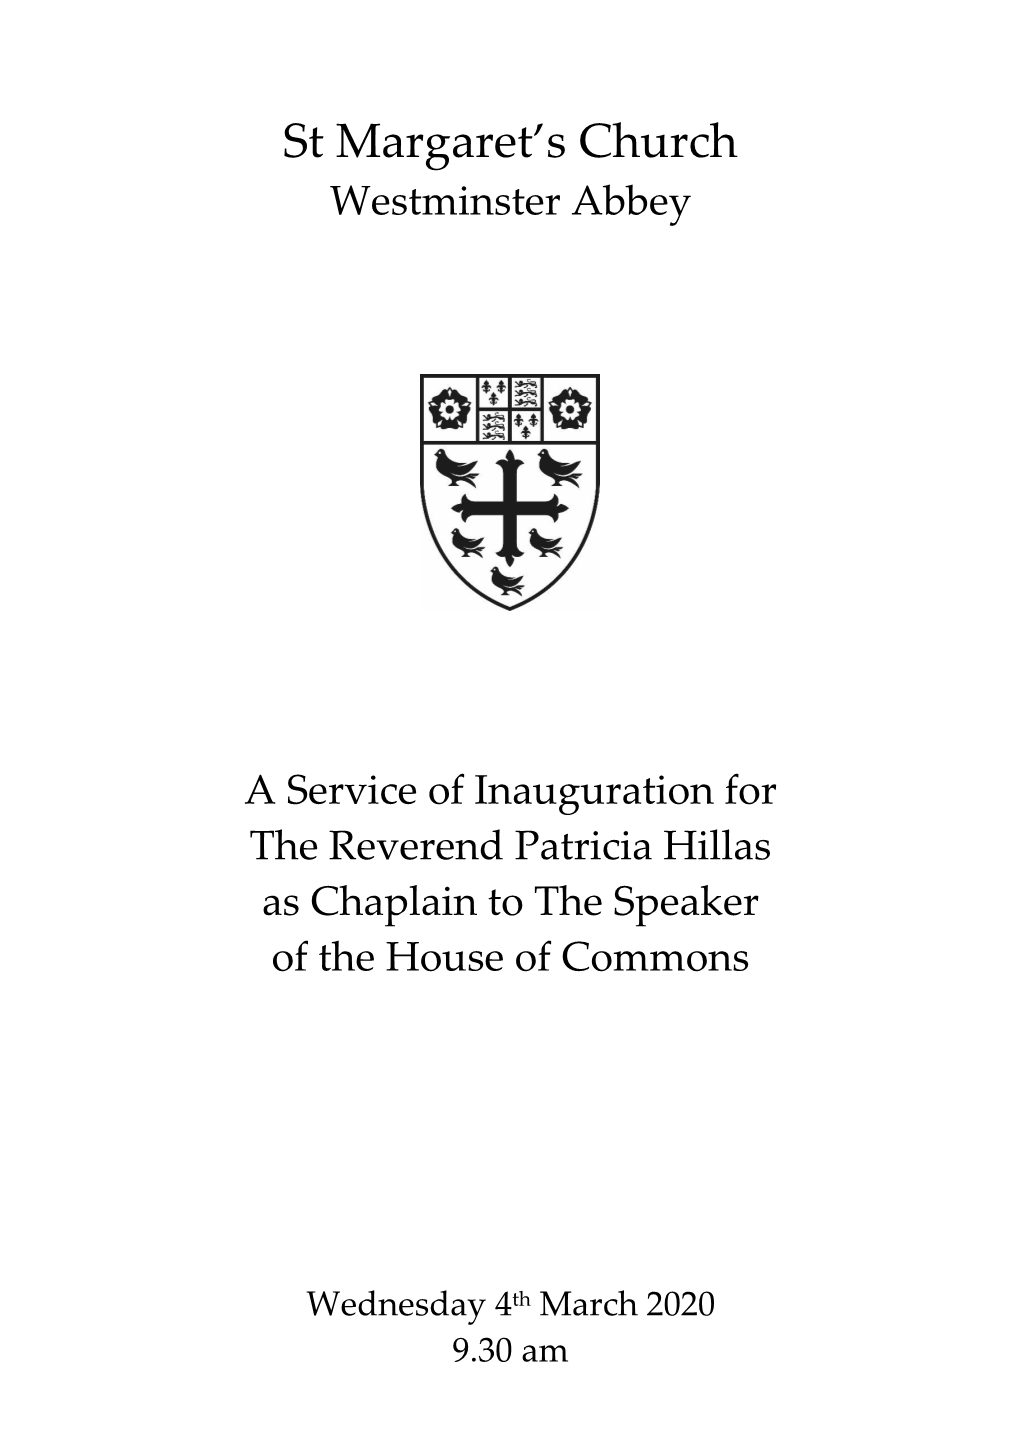 Order of Service for a Service of Inauguration